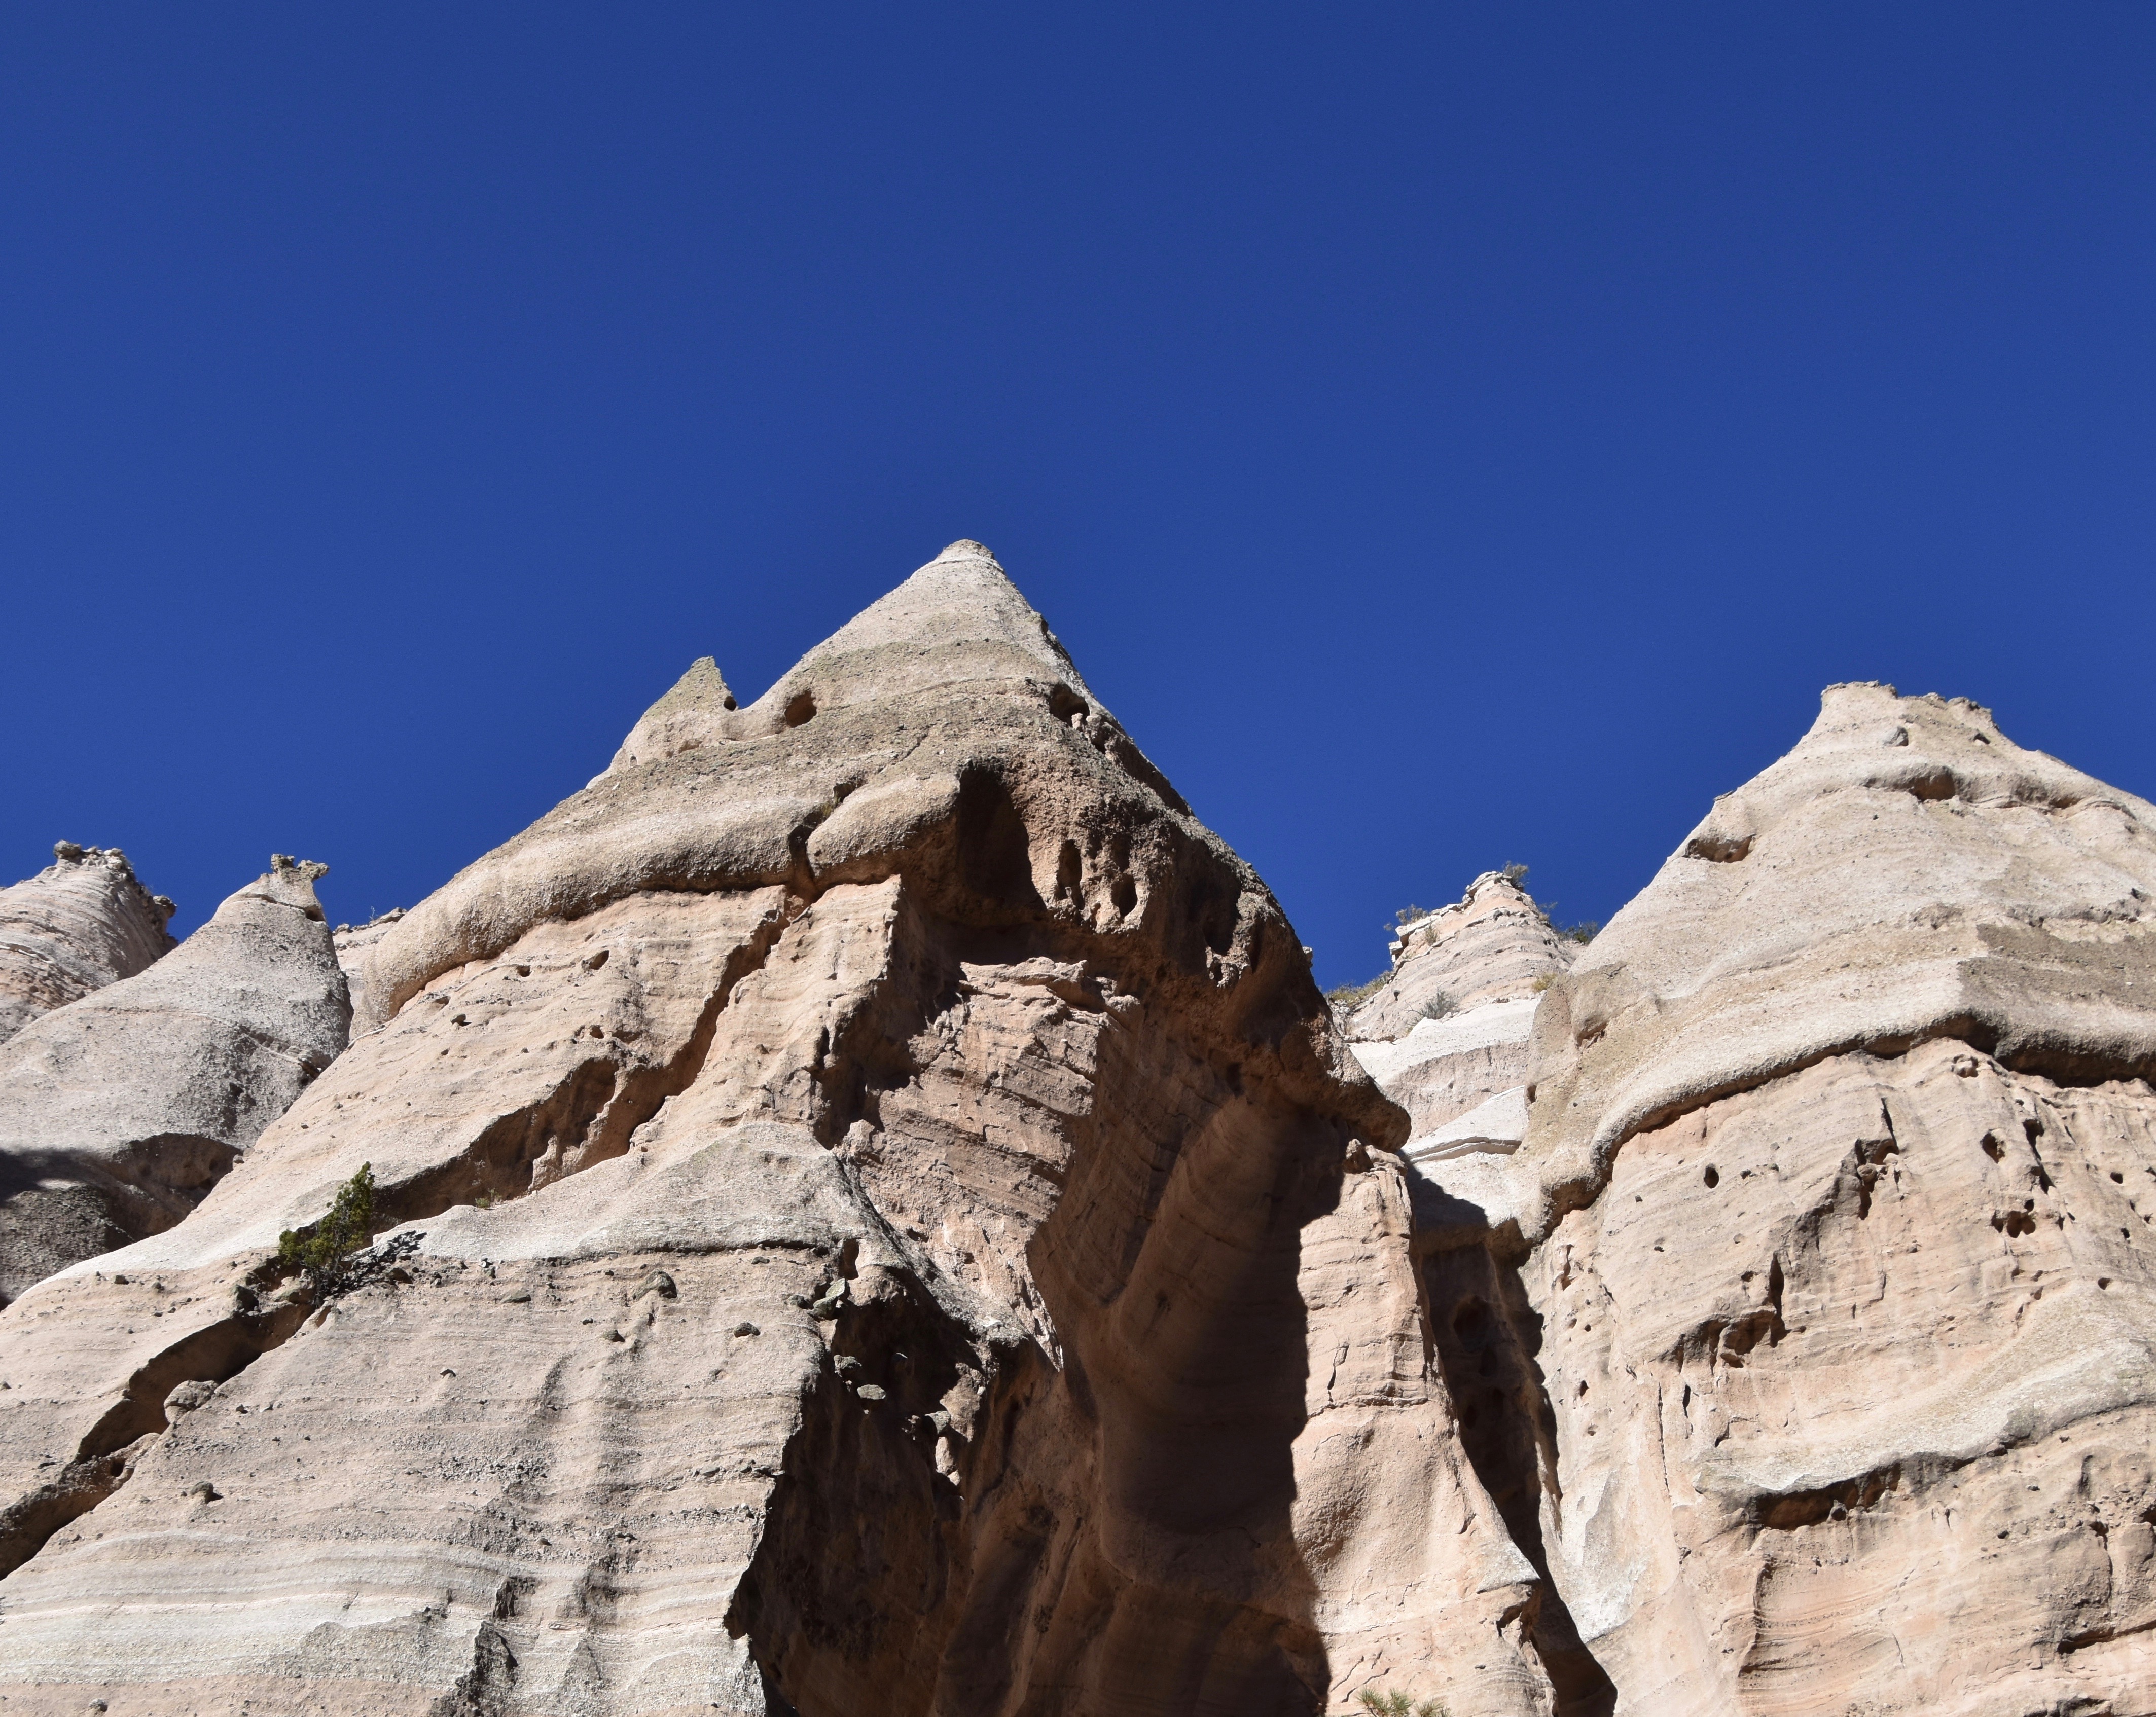 Looking Up From the Slot Canyon, Tent Rocks